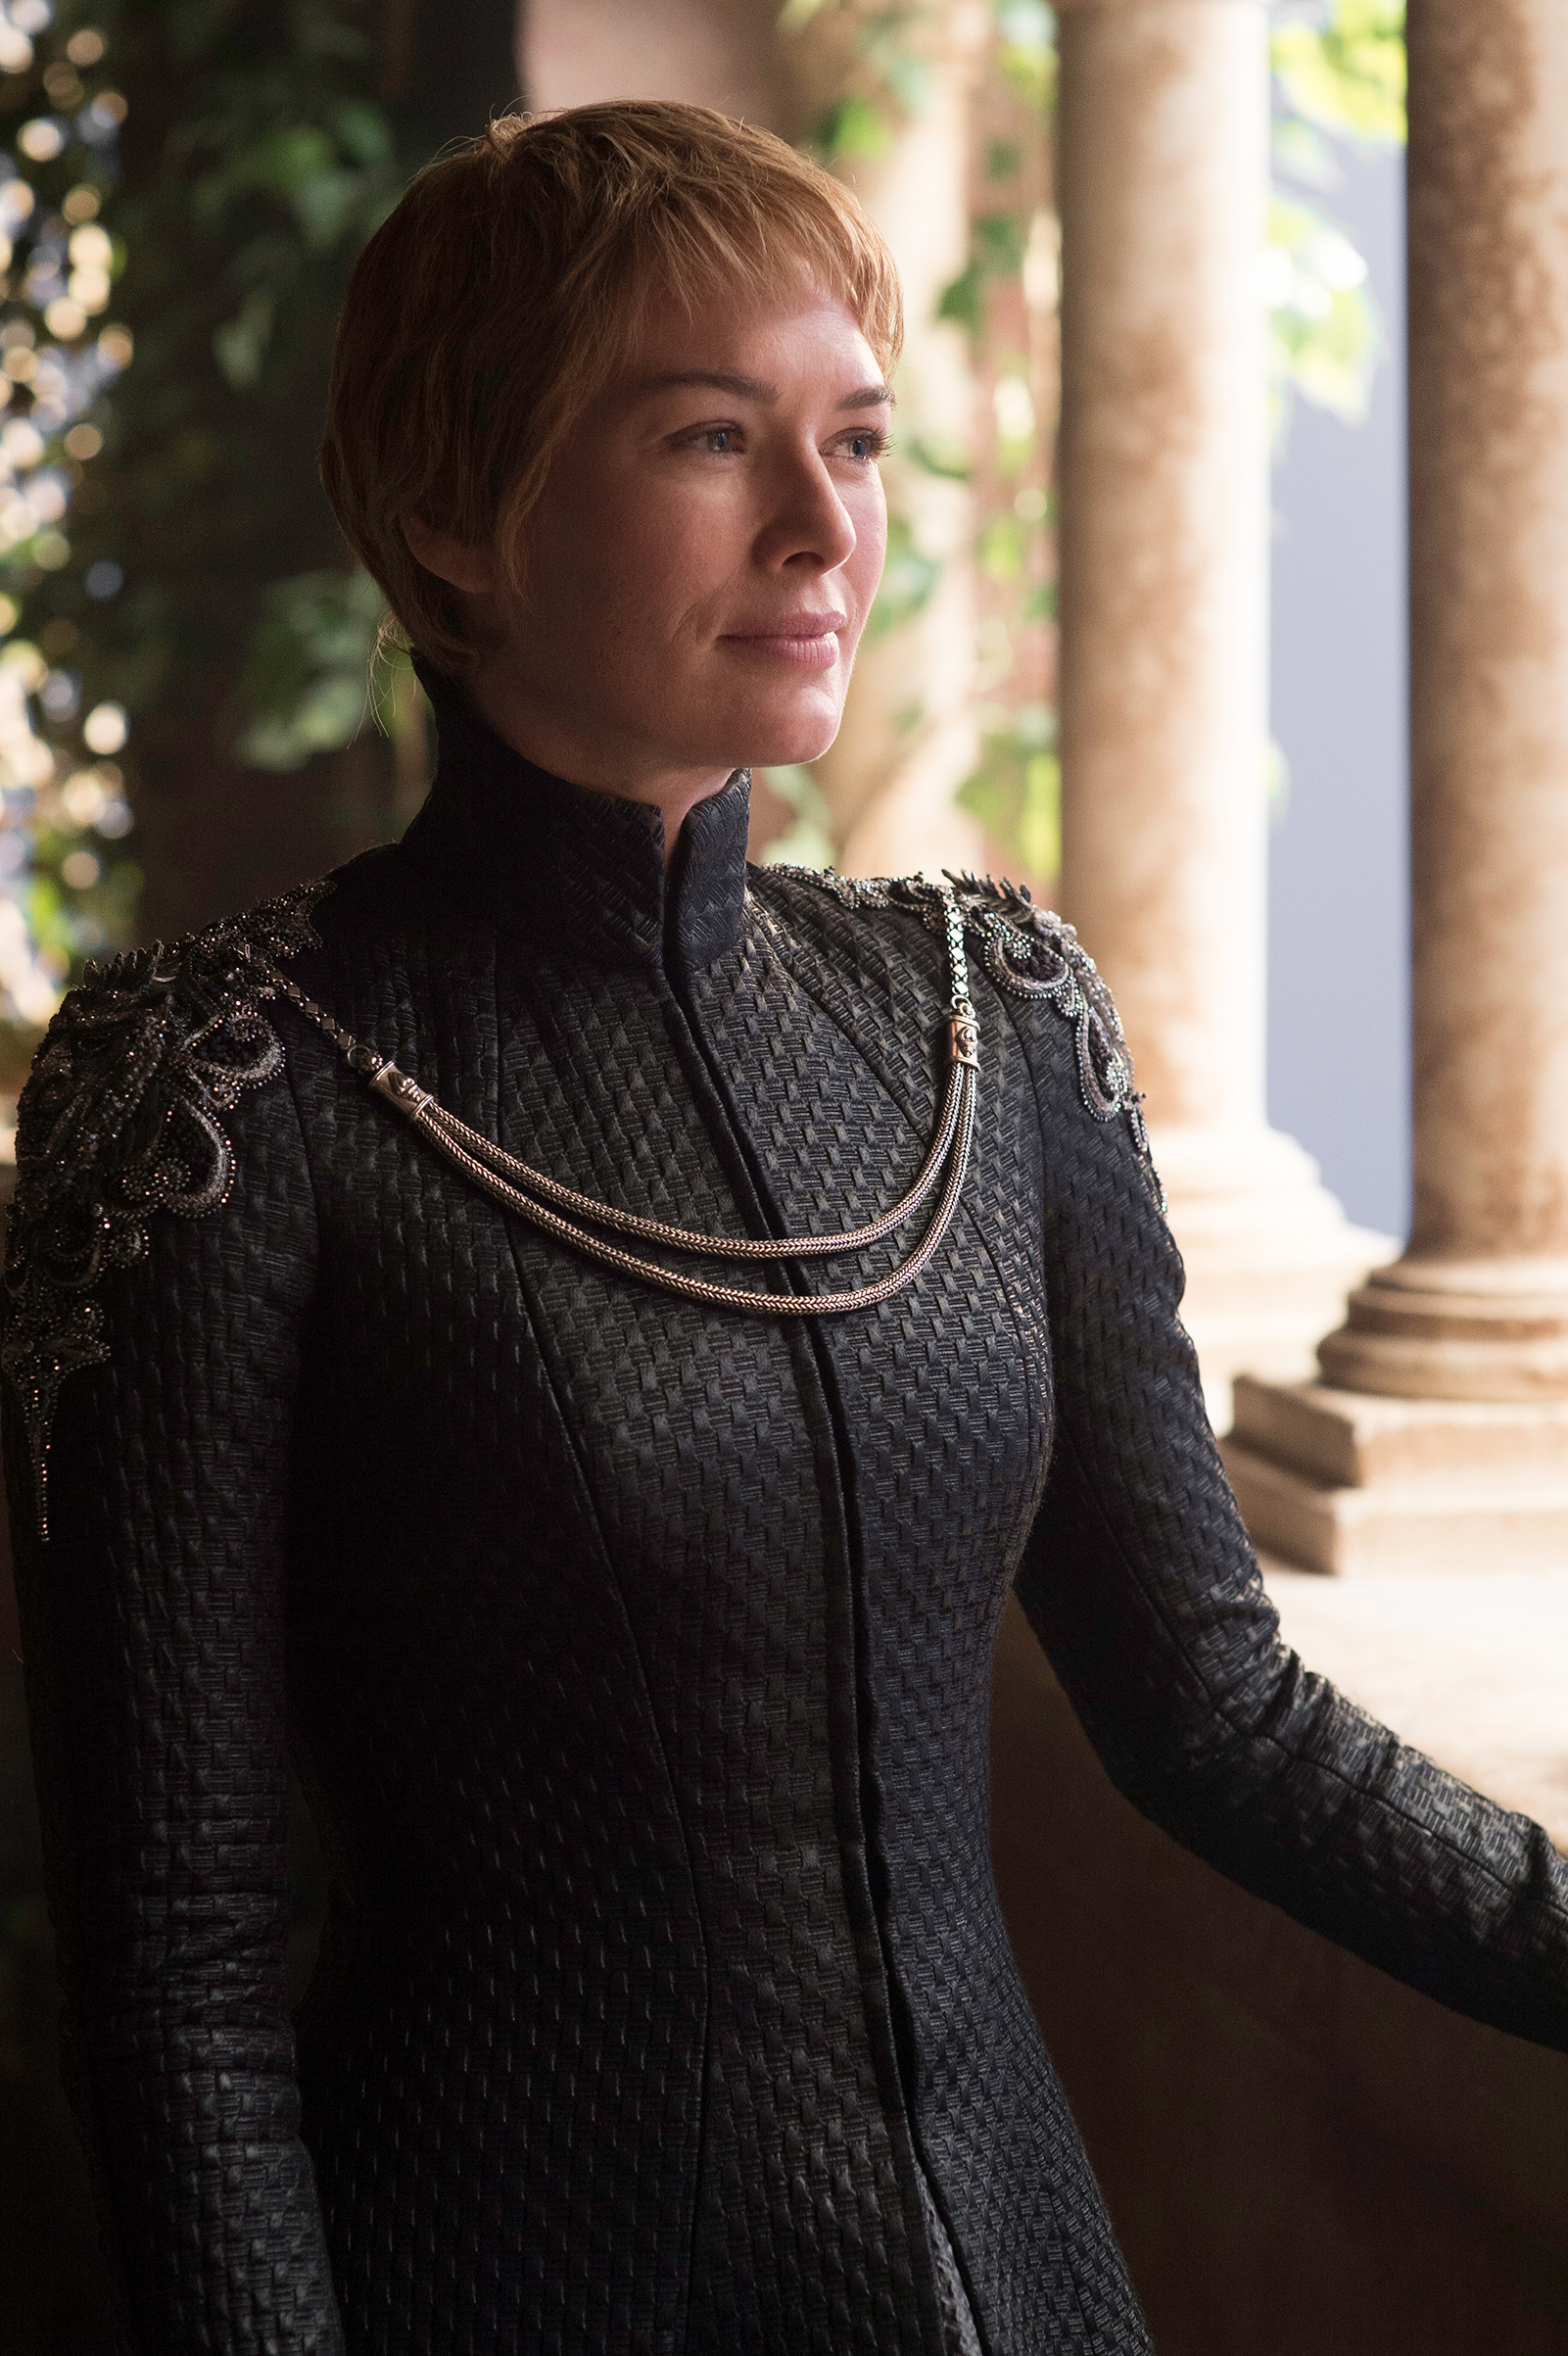 Cersei Lannister in Season 6 of Game of Thrones